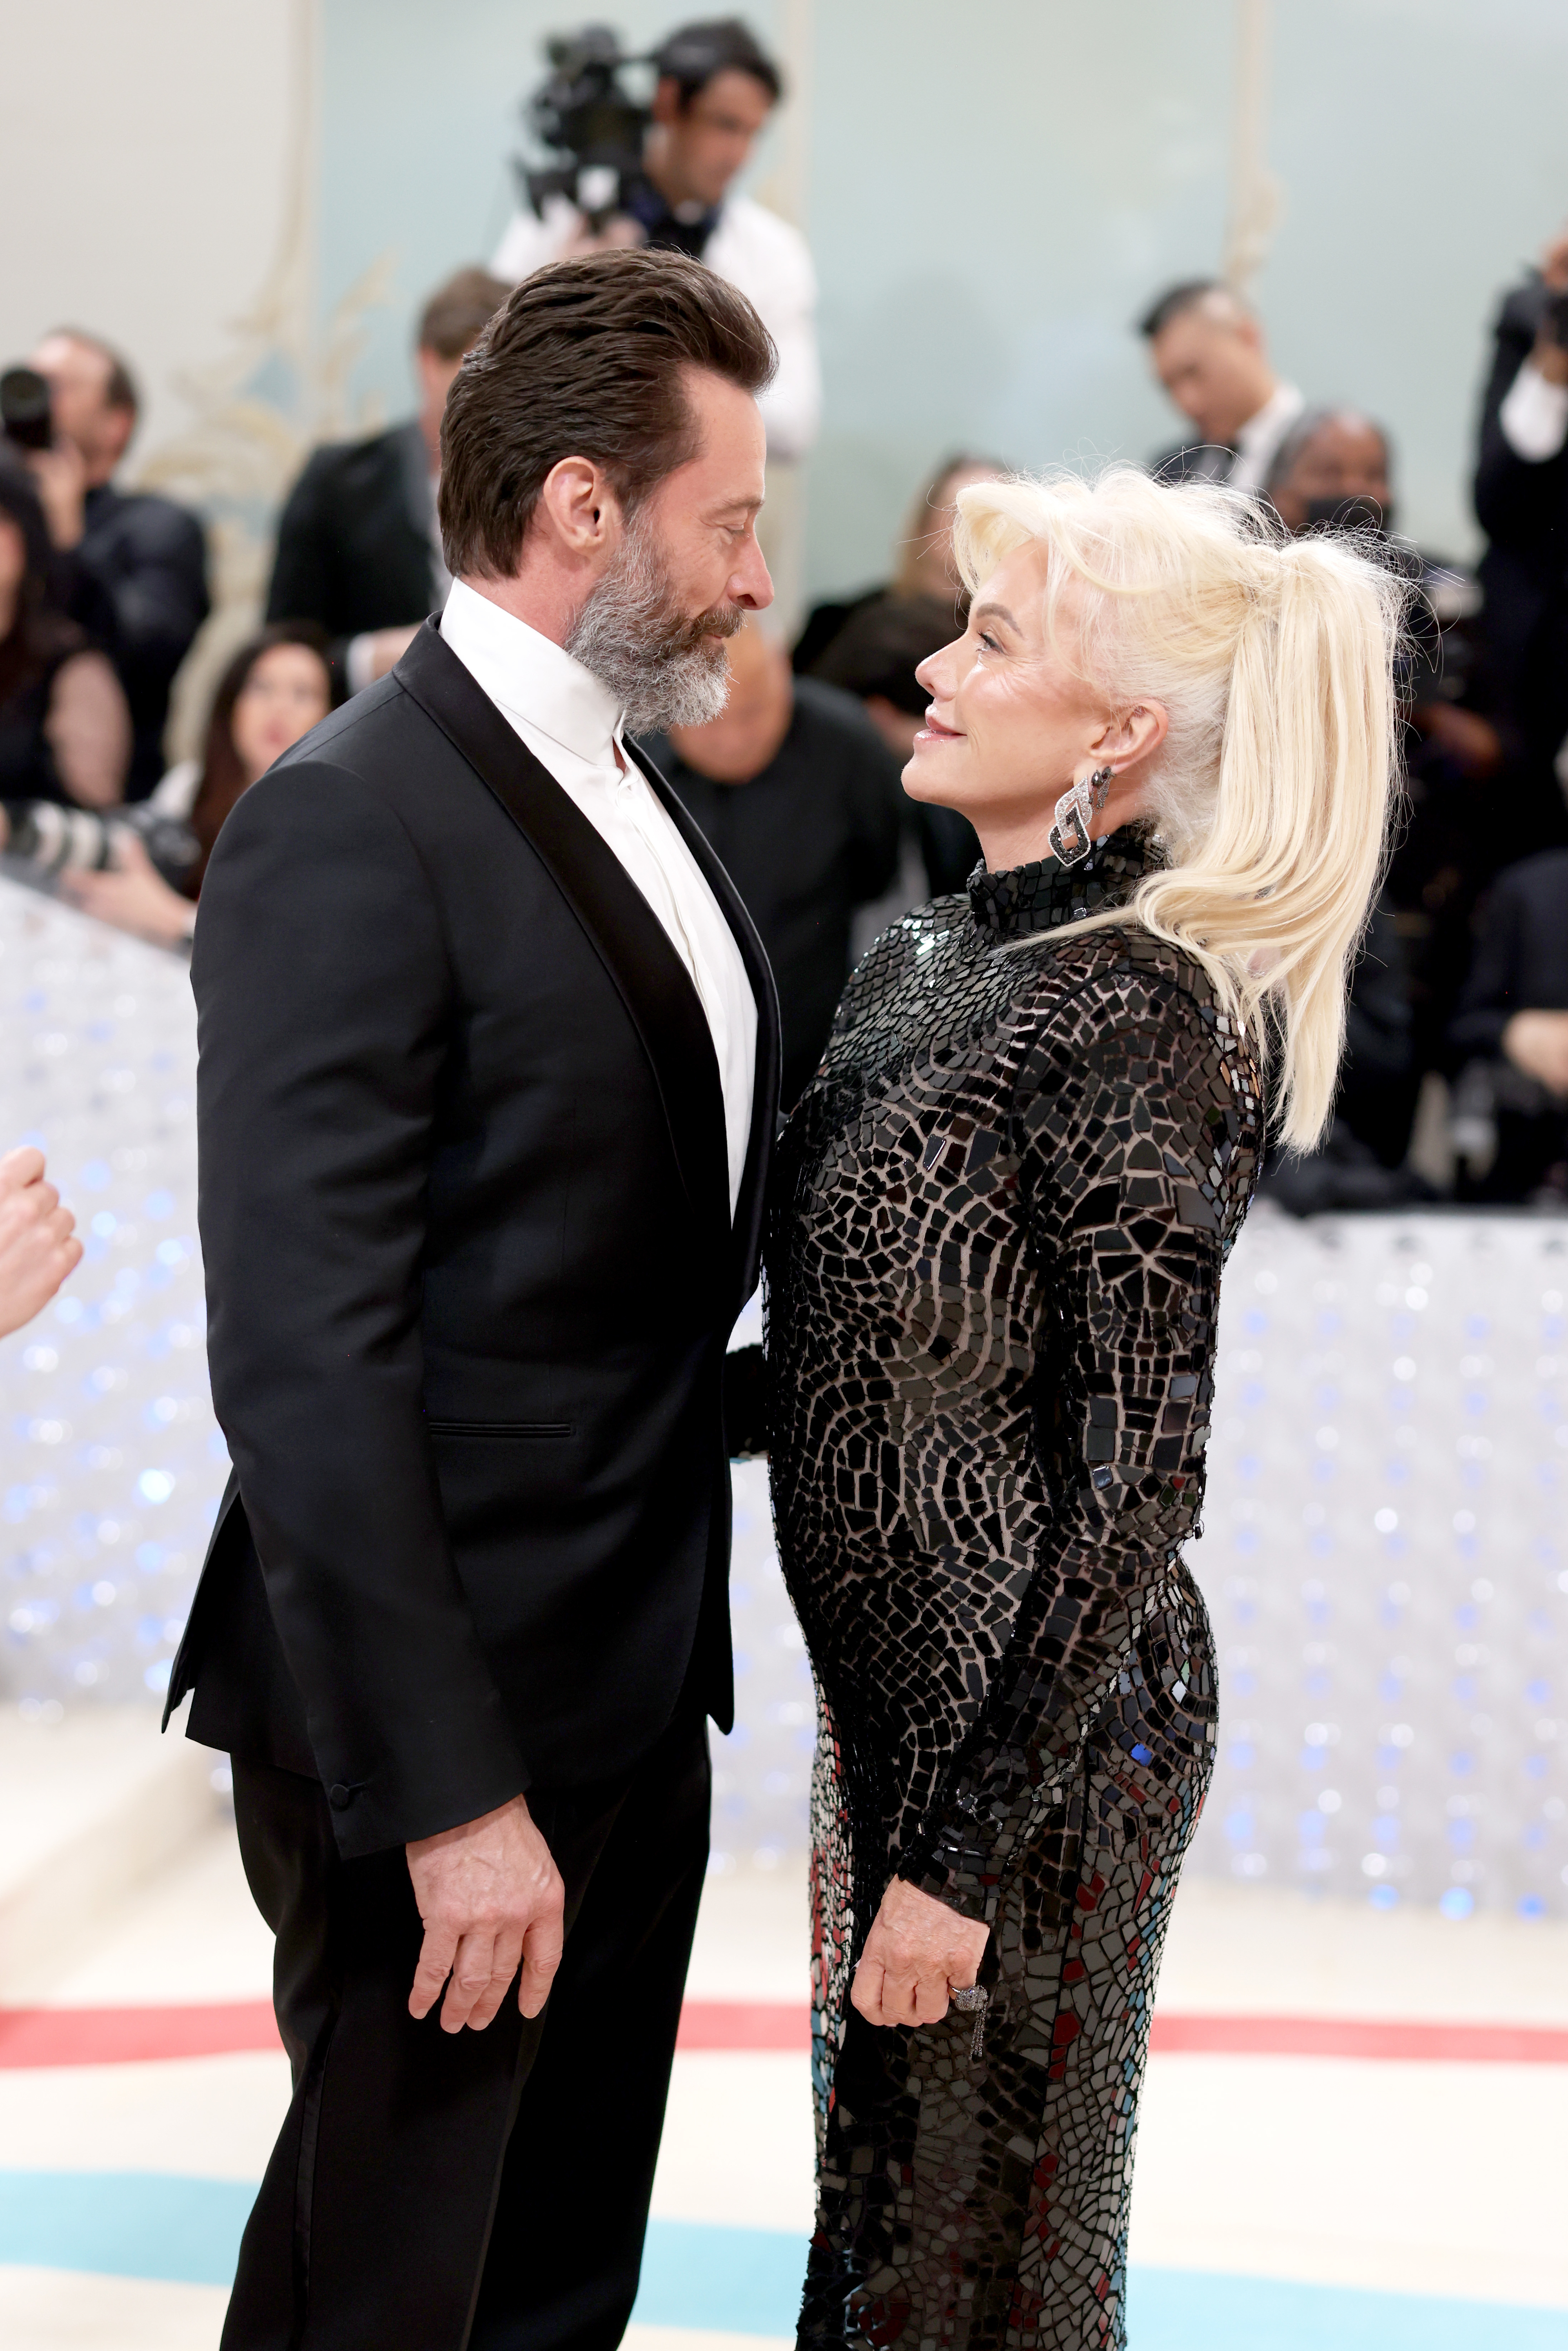 Hugh Jackman and Deborra-Lee Furness looking at each other lovingly on the red carpet